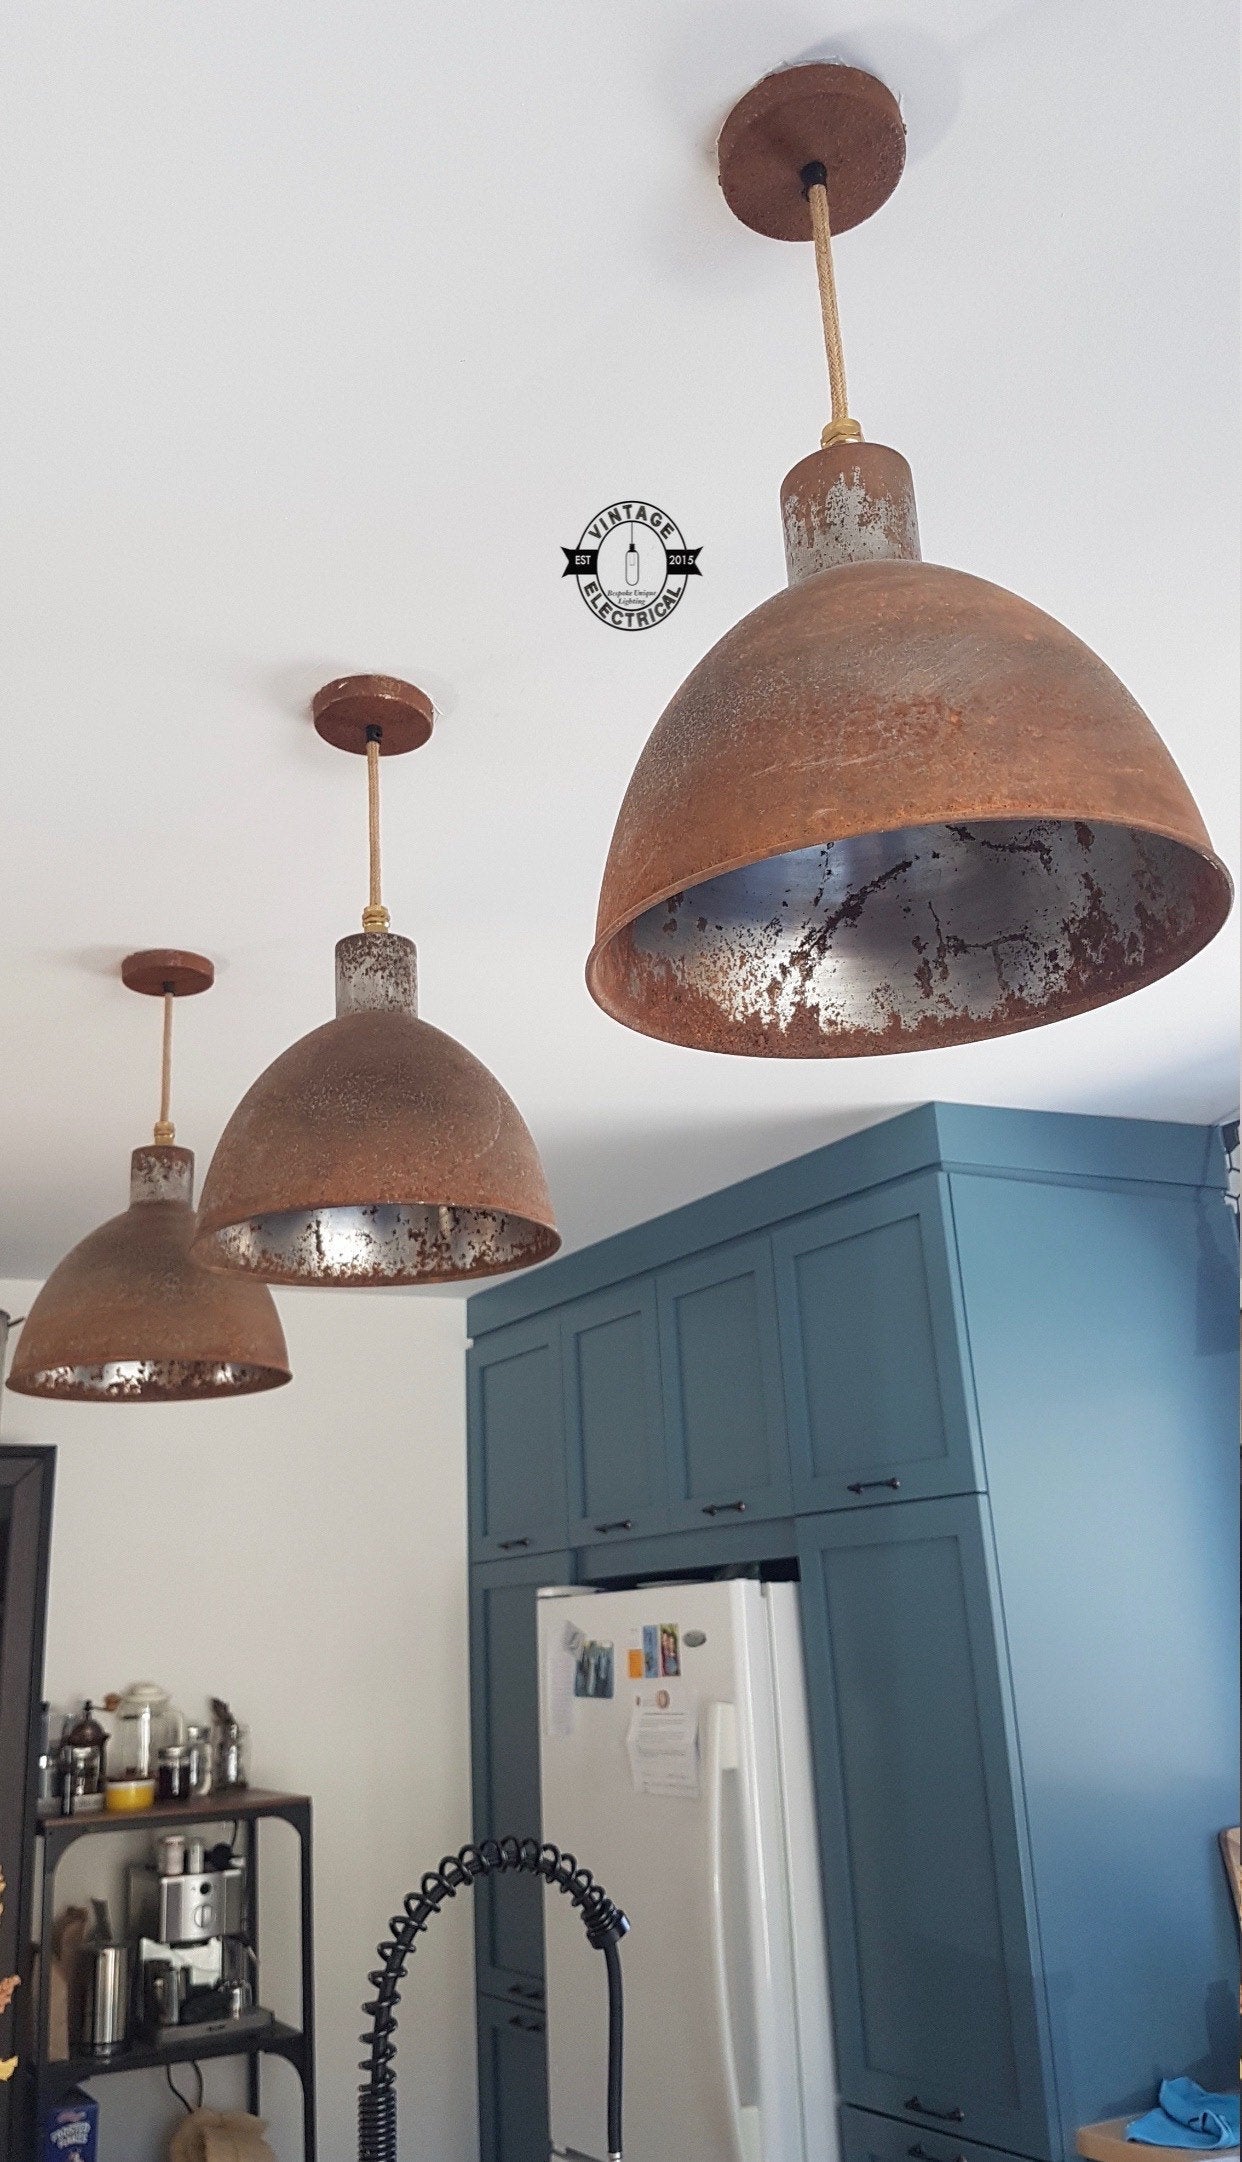 Warham ~ Rusted Solid Steel Industrial Shade Pendant Set Light | Ceiling Dining Room | Kitchen Table | Vintage 1 x Edison Filament Bulb